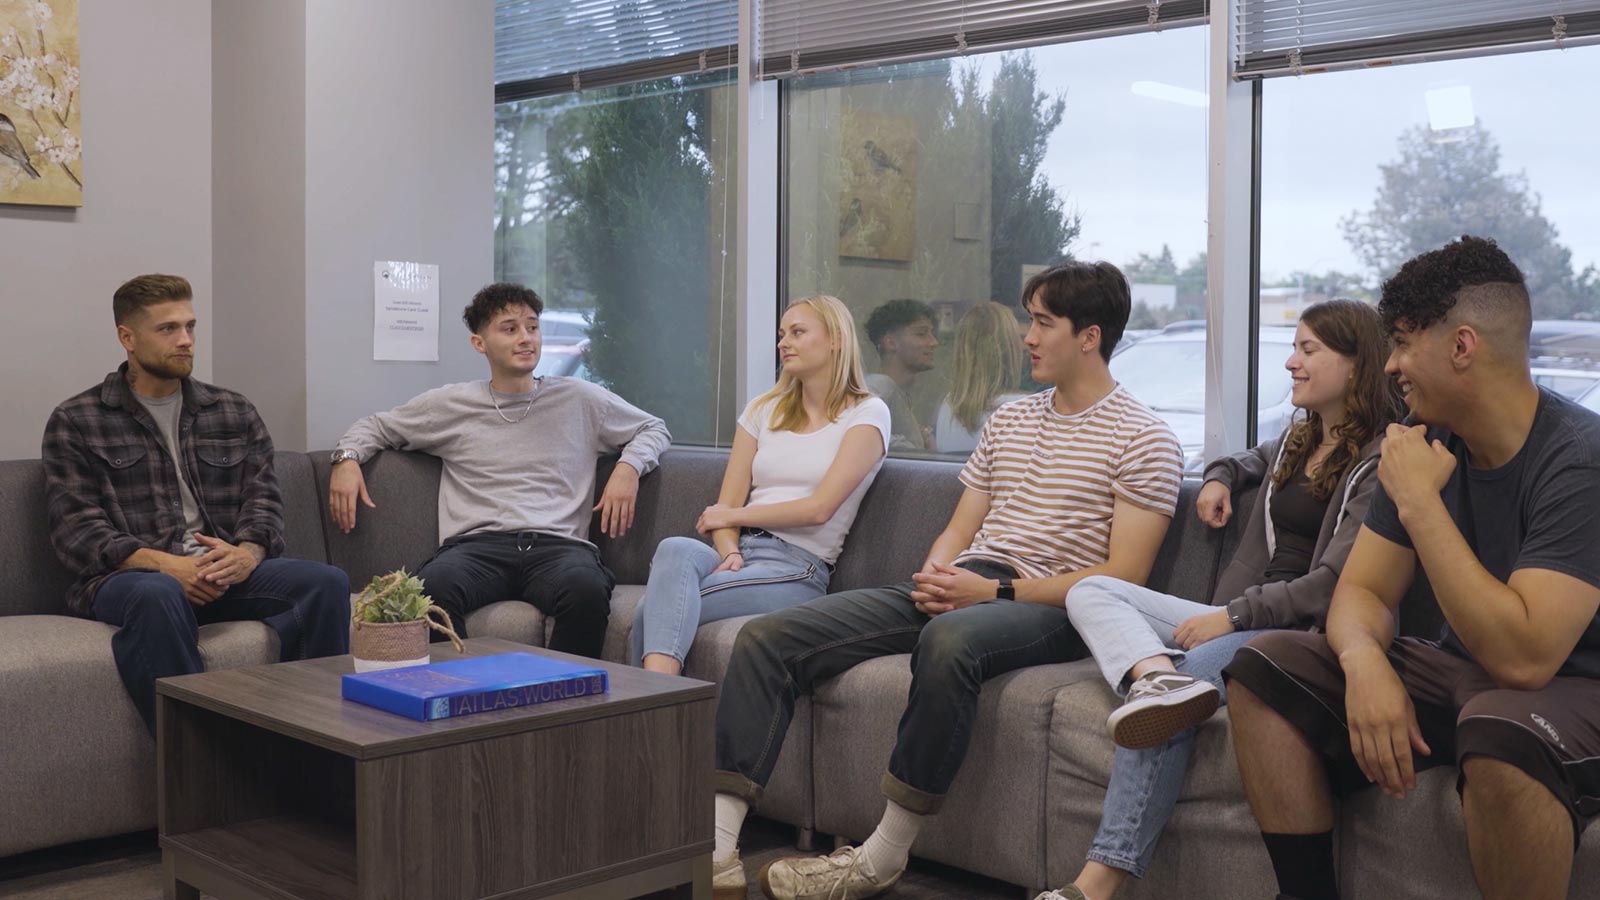 A relaxed social scene in a modern waiting area with a group of young adults having conversations.